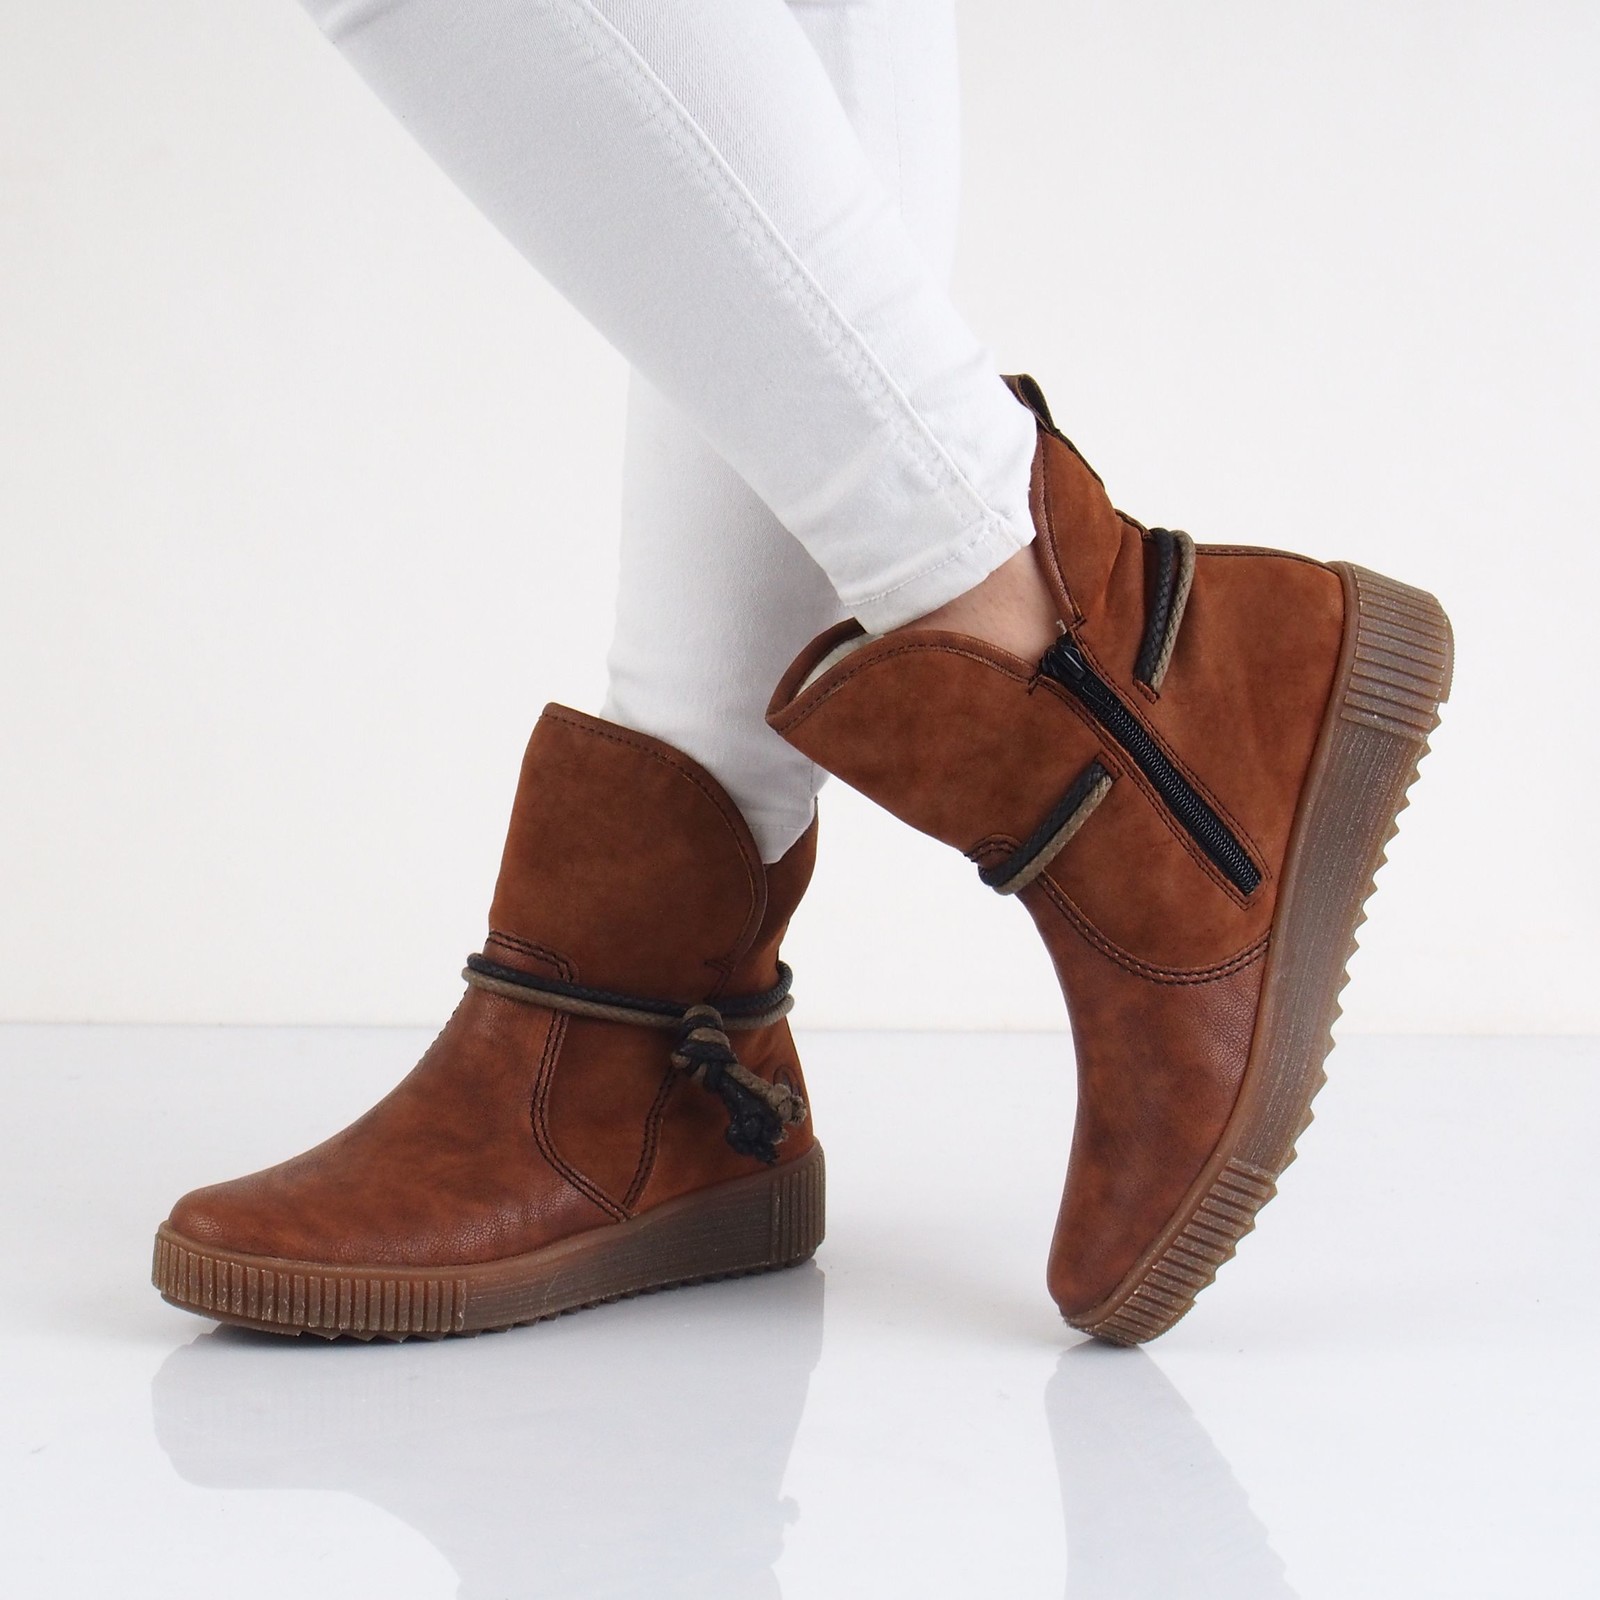 Rieker stylish ankle boots with lining - cognac brown |